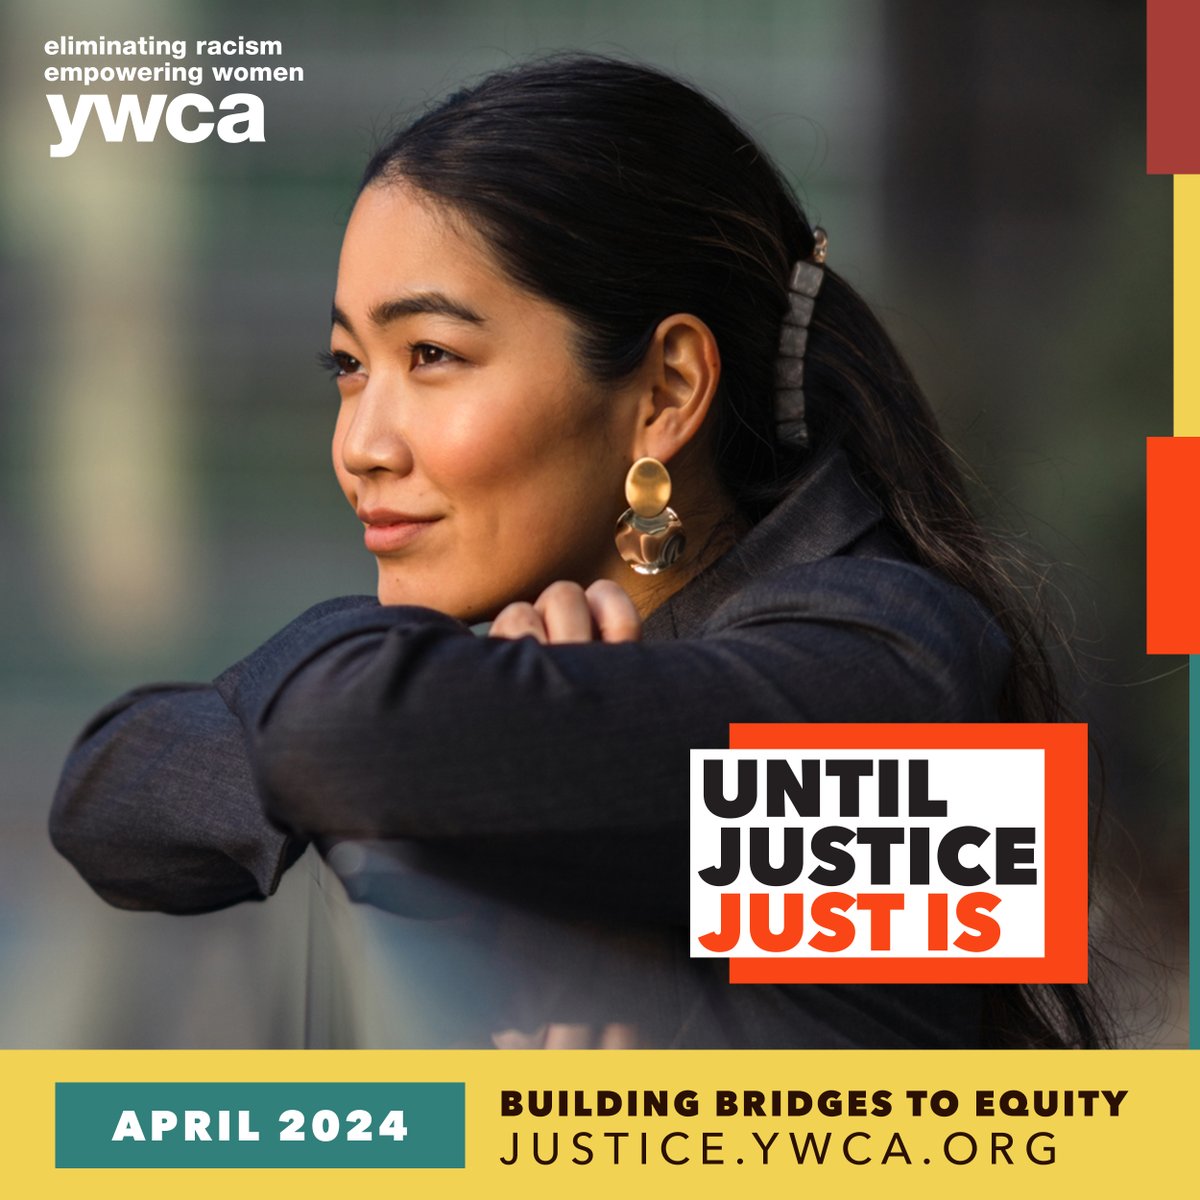 To stay up to date on how you can help make justice a reality for all, sign up for our mailing list ✉️ We won’t rest until justice… just is. justice.ywca.org #UntilJusticeJustIs #UJJI #RacialJustice #EliminateRacism